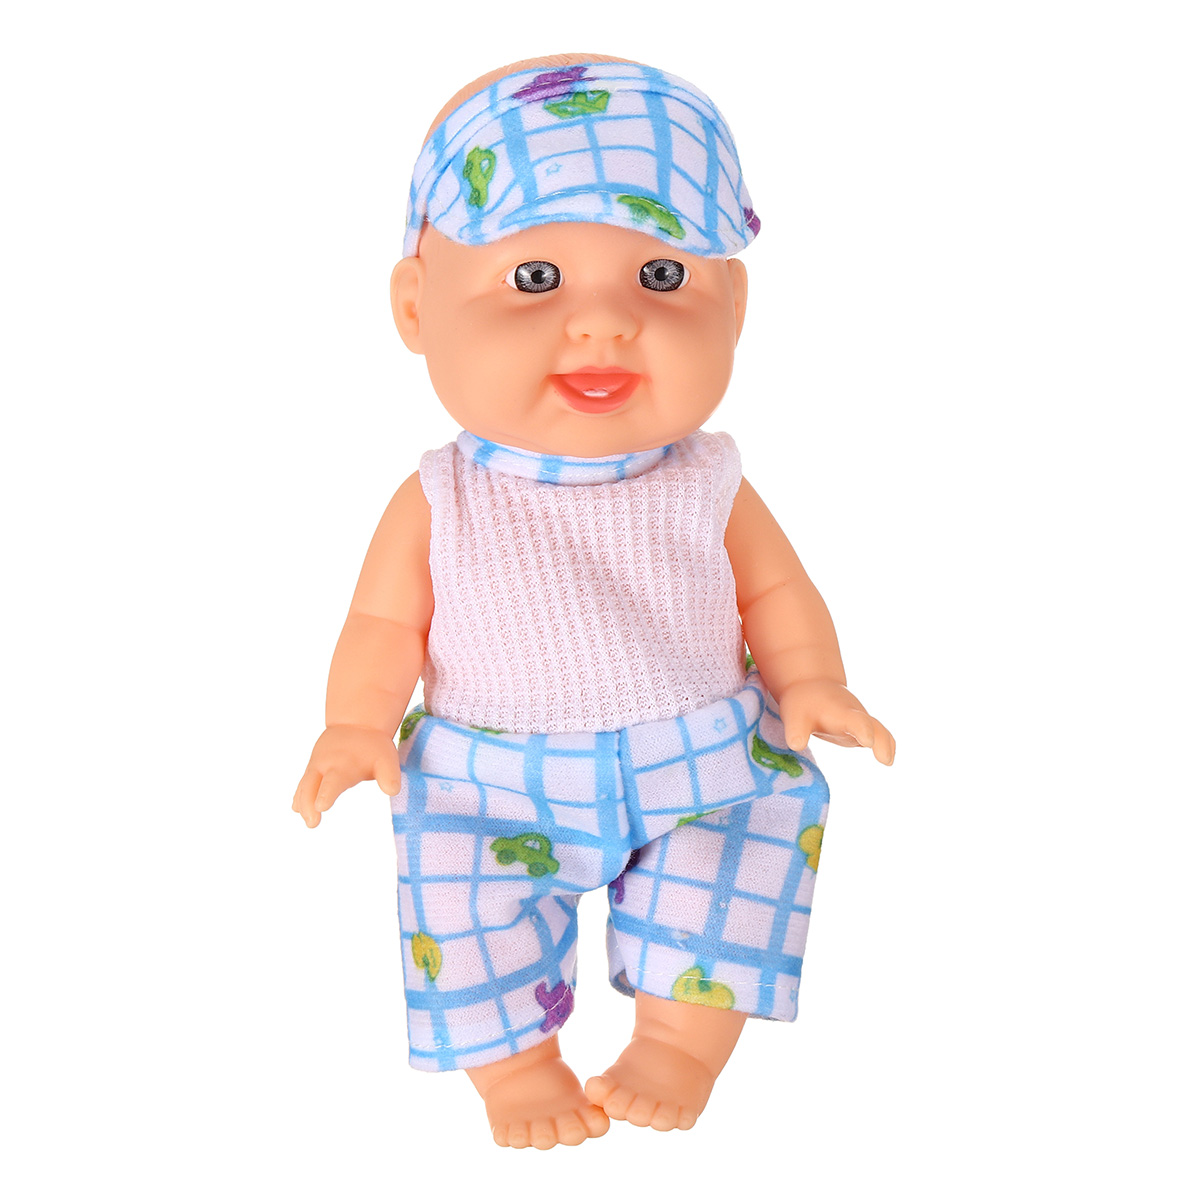 Simulation-Baby-3D-Creative-Cute-Doll-Play-House-Toy-Doll-Vinyl-Doll-Gift-1818656-20